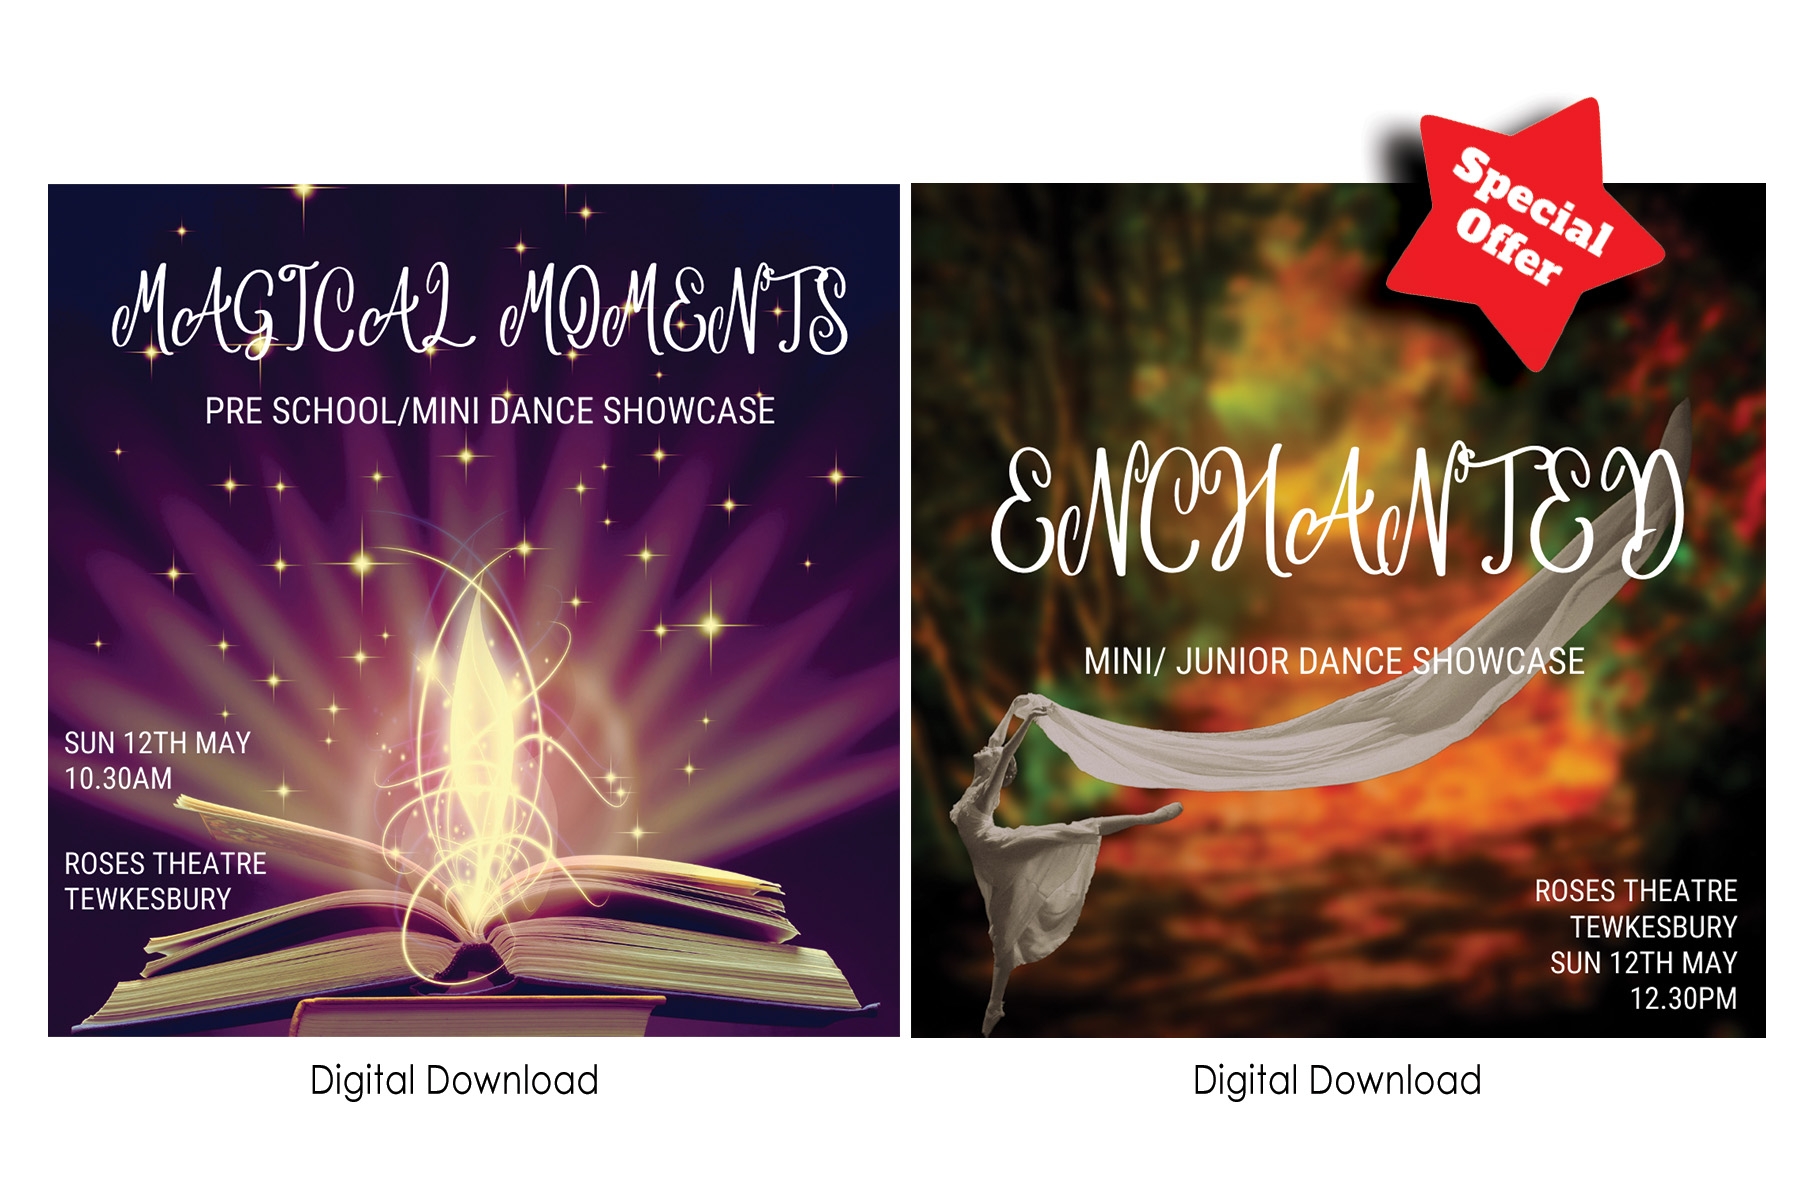 Dance In Motion Academy ‘Enchanted’ & ‘Magical Moments’ – DIGITAL DOWNLOAD SHOW OFFER